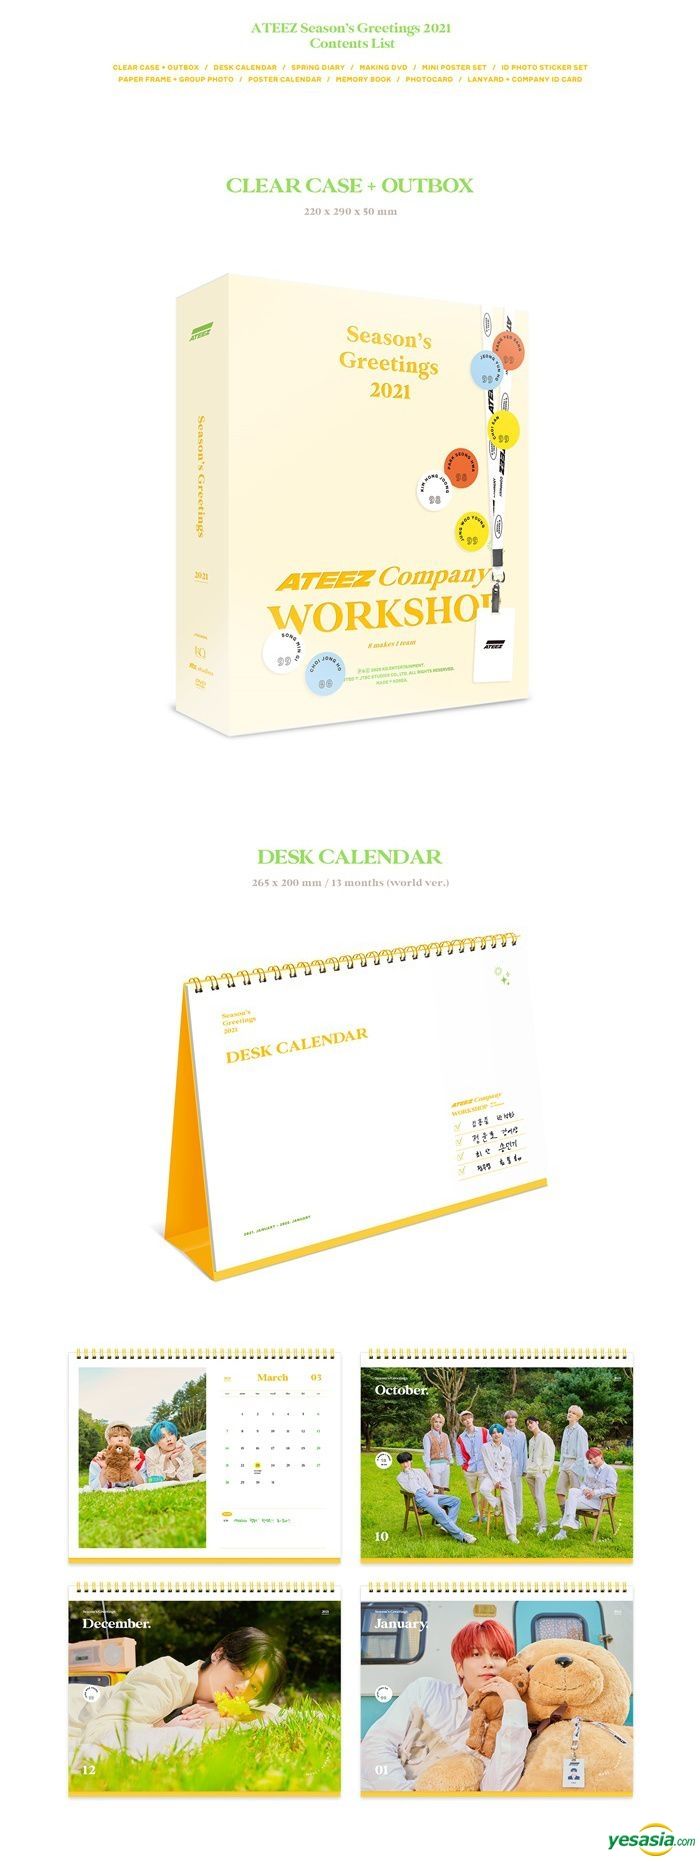 YESASIA: ATEEZ 2021 Season's Greetings - ATEEZ Company Workshop  DVD,CALENDAR,PHOTO/POSTER,GROUPS,FEMALE STARS,GIFTS,Celebrity Gifts - ATEEZ,  JTL Music - - Free Shipping